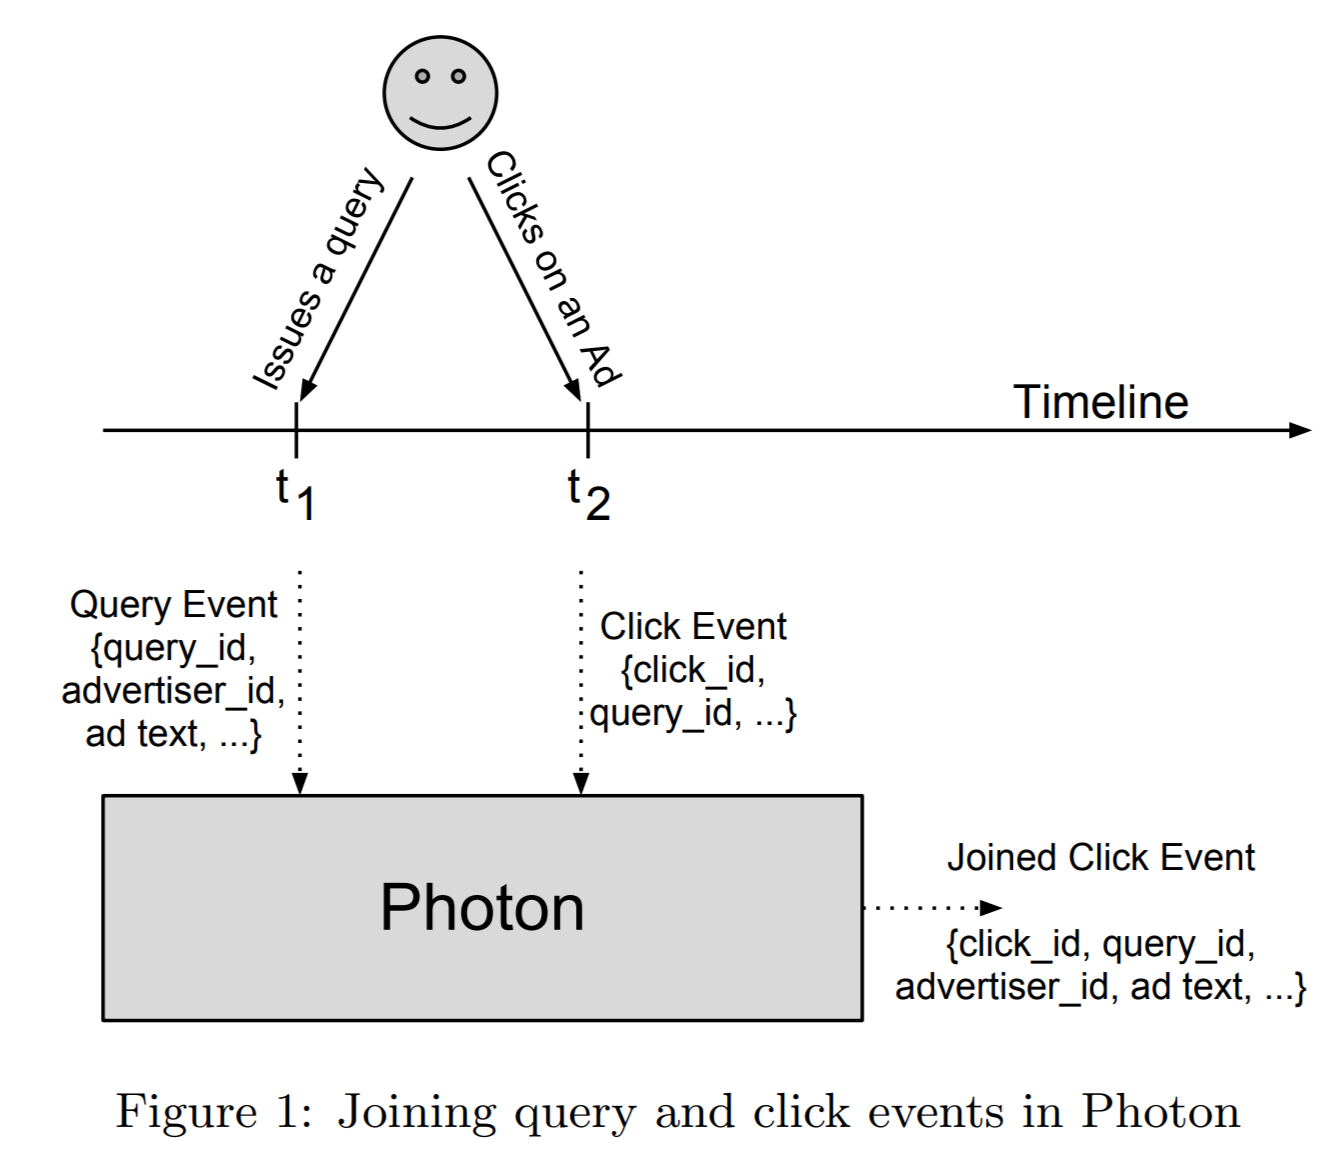 Joining query and click events in Photon